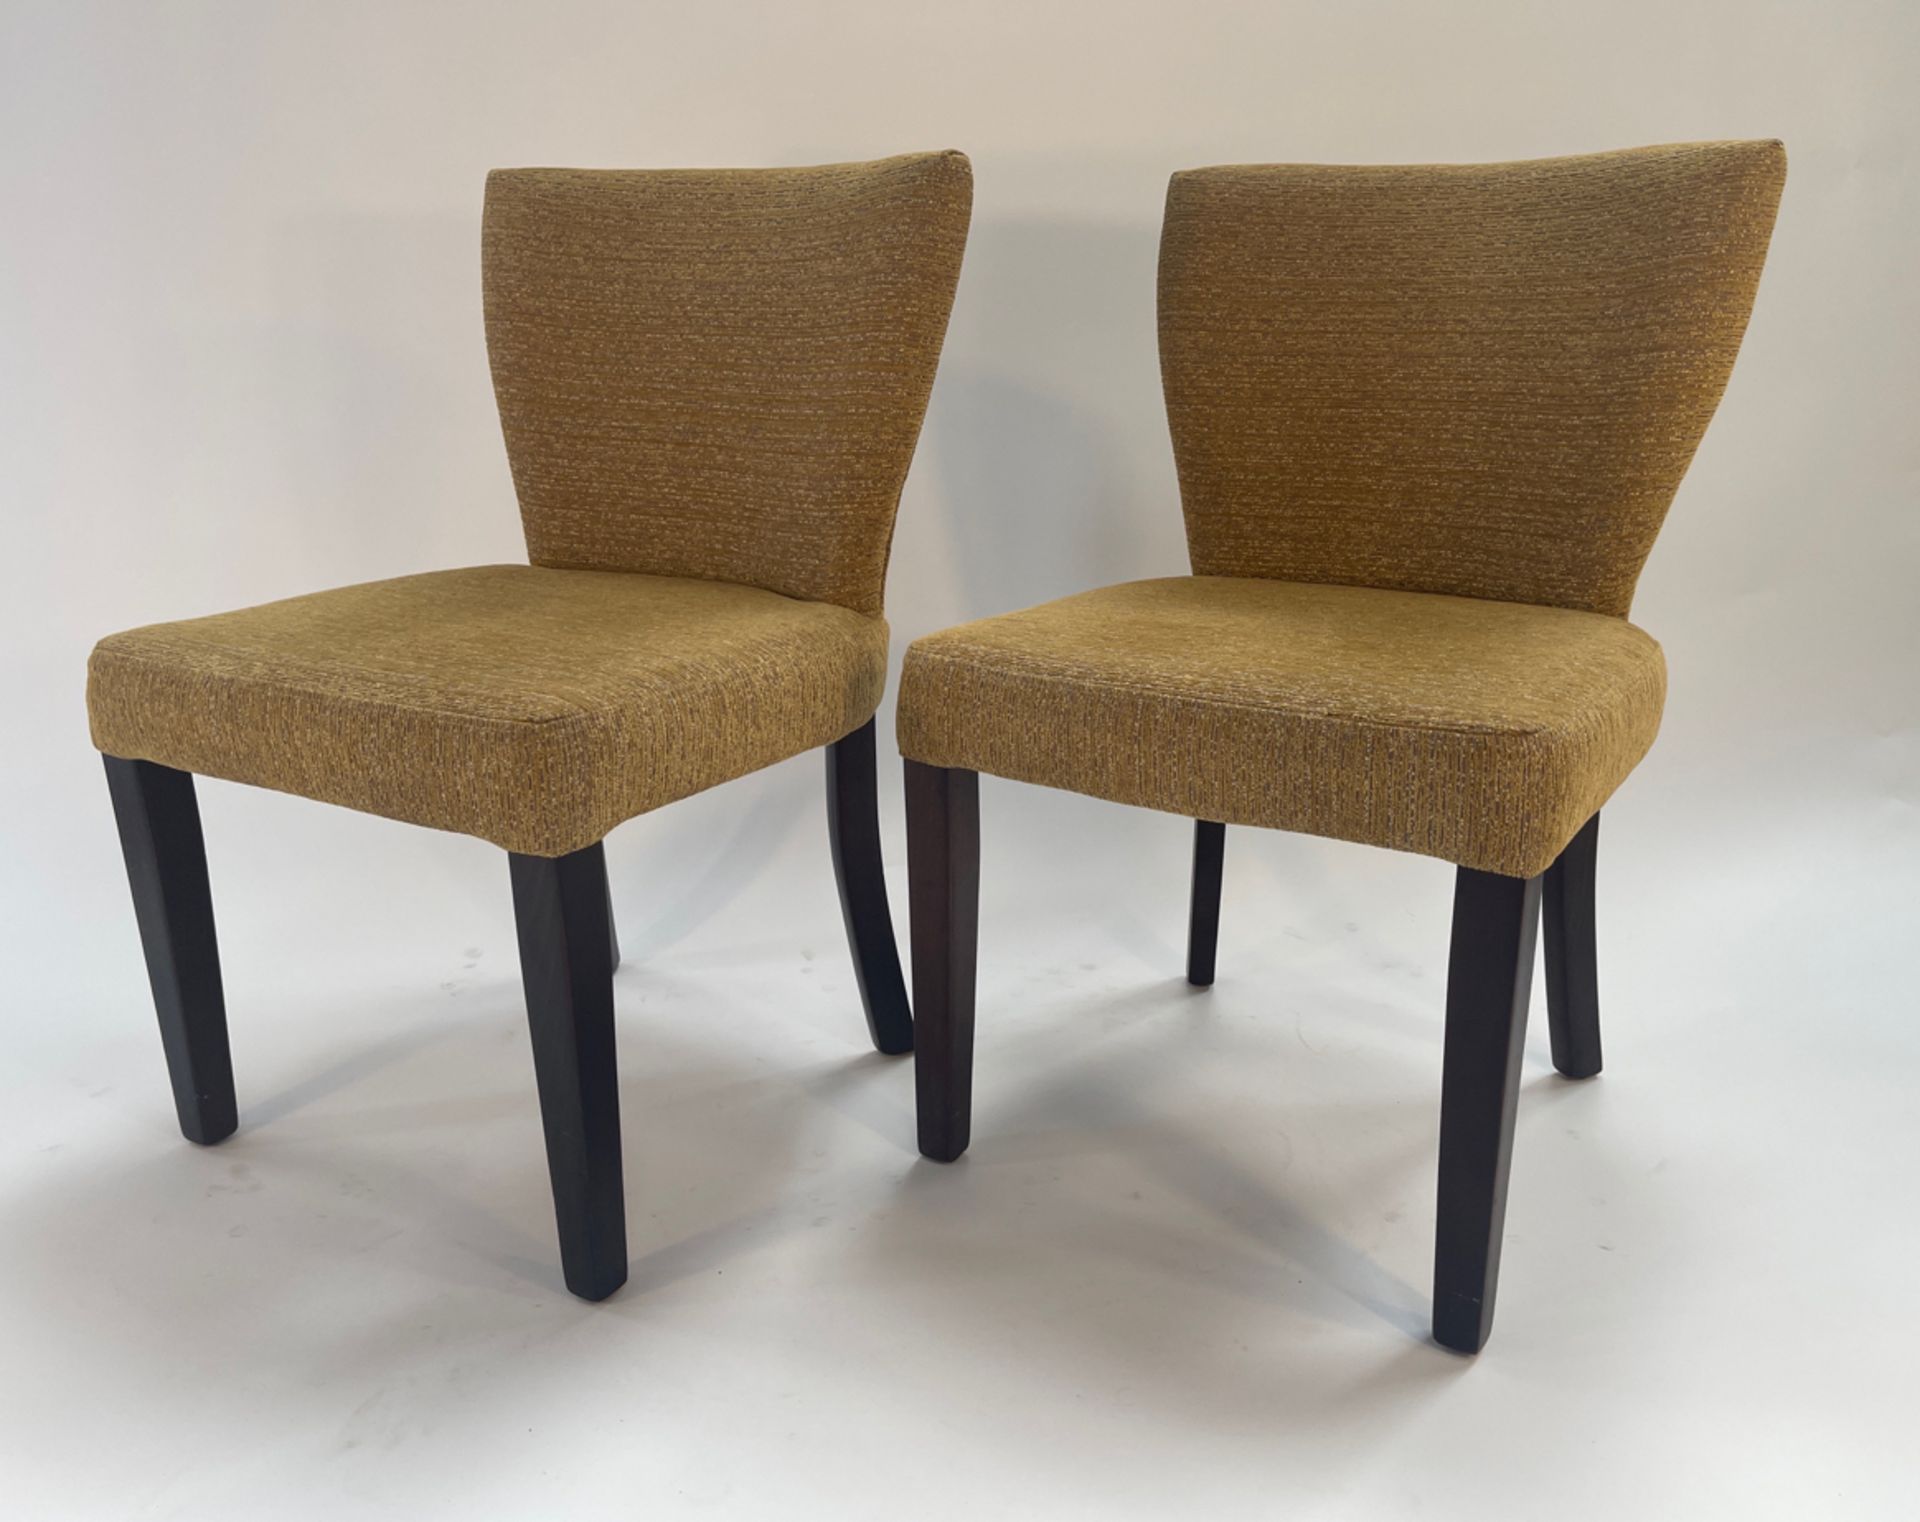 Pair of Fabric Dining Chairs - Image 2 of 5